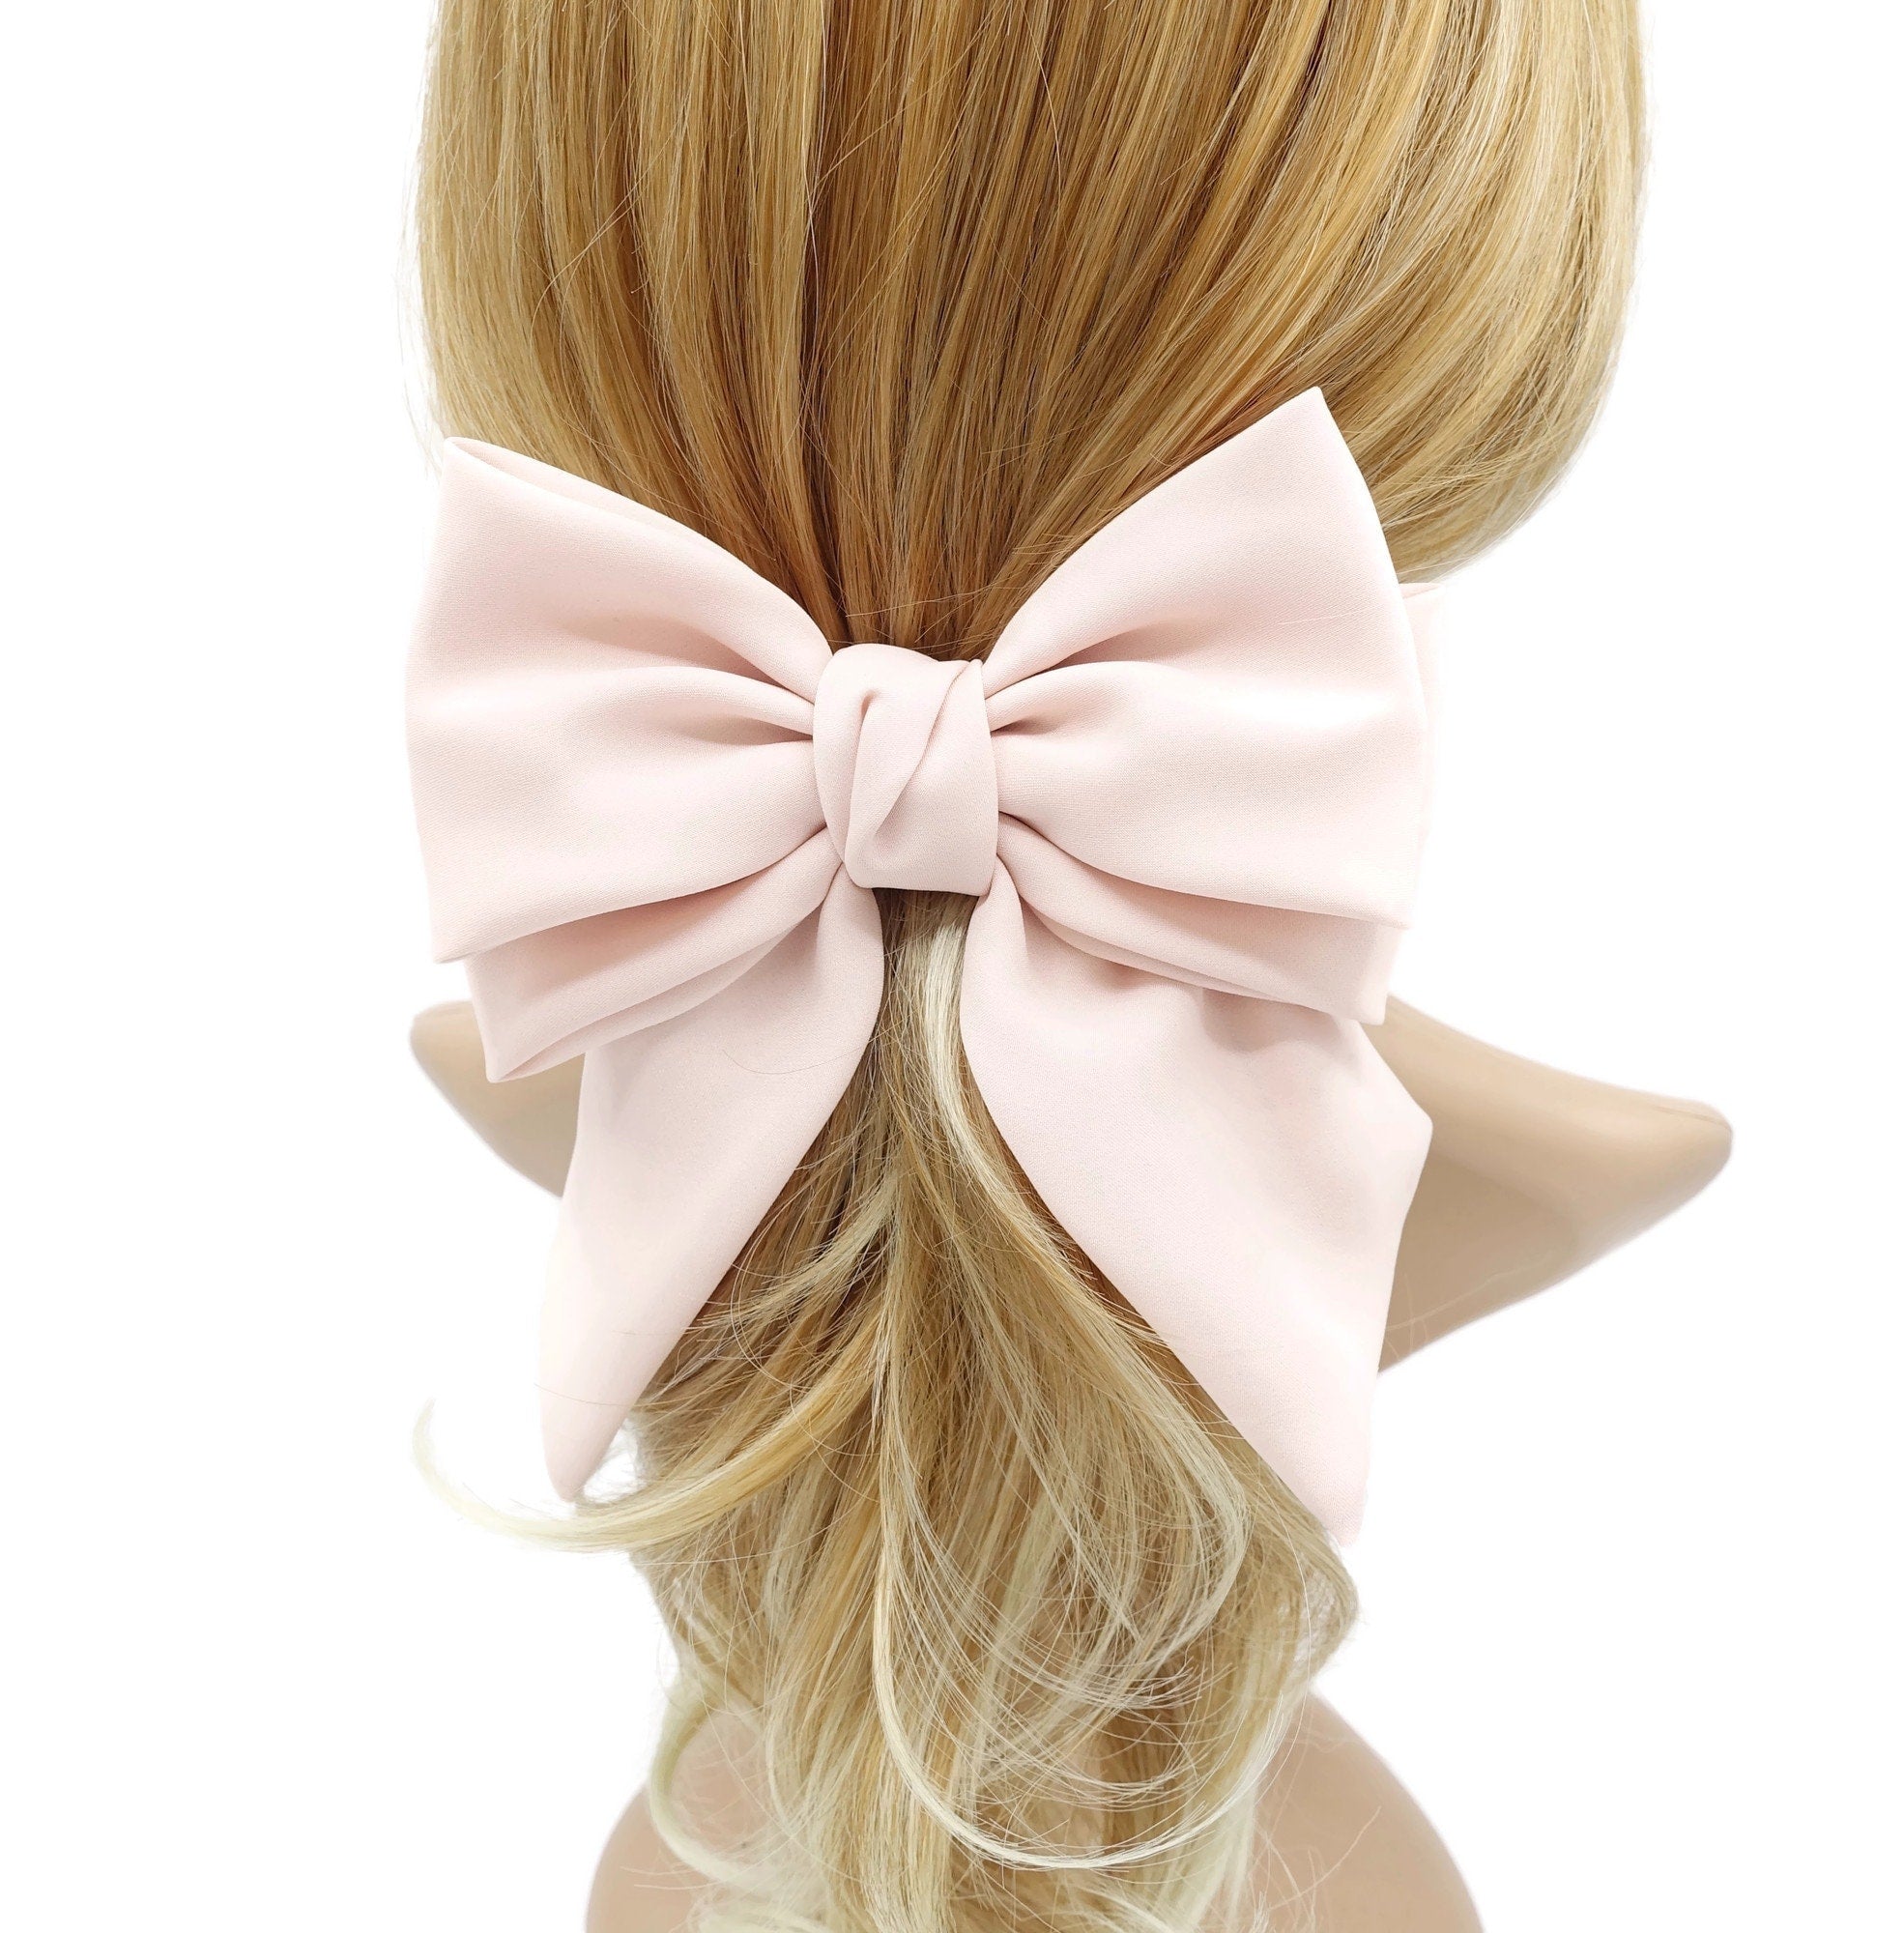 veryshine.com Barrette (Bow) Light blush pink thick double layered tail hair bow chiffon hair barrette for women